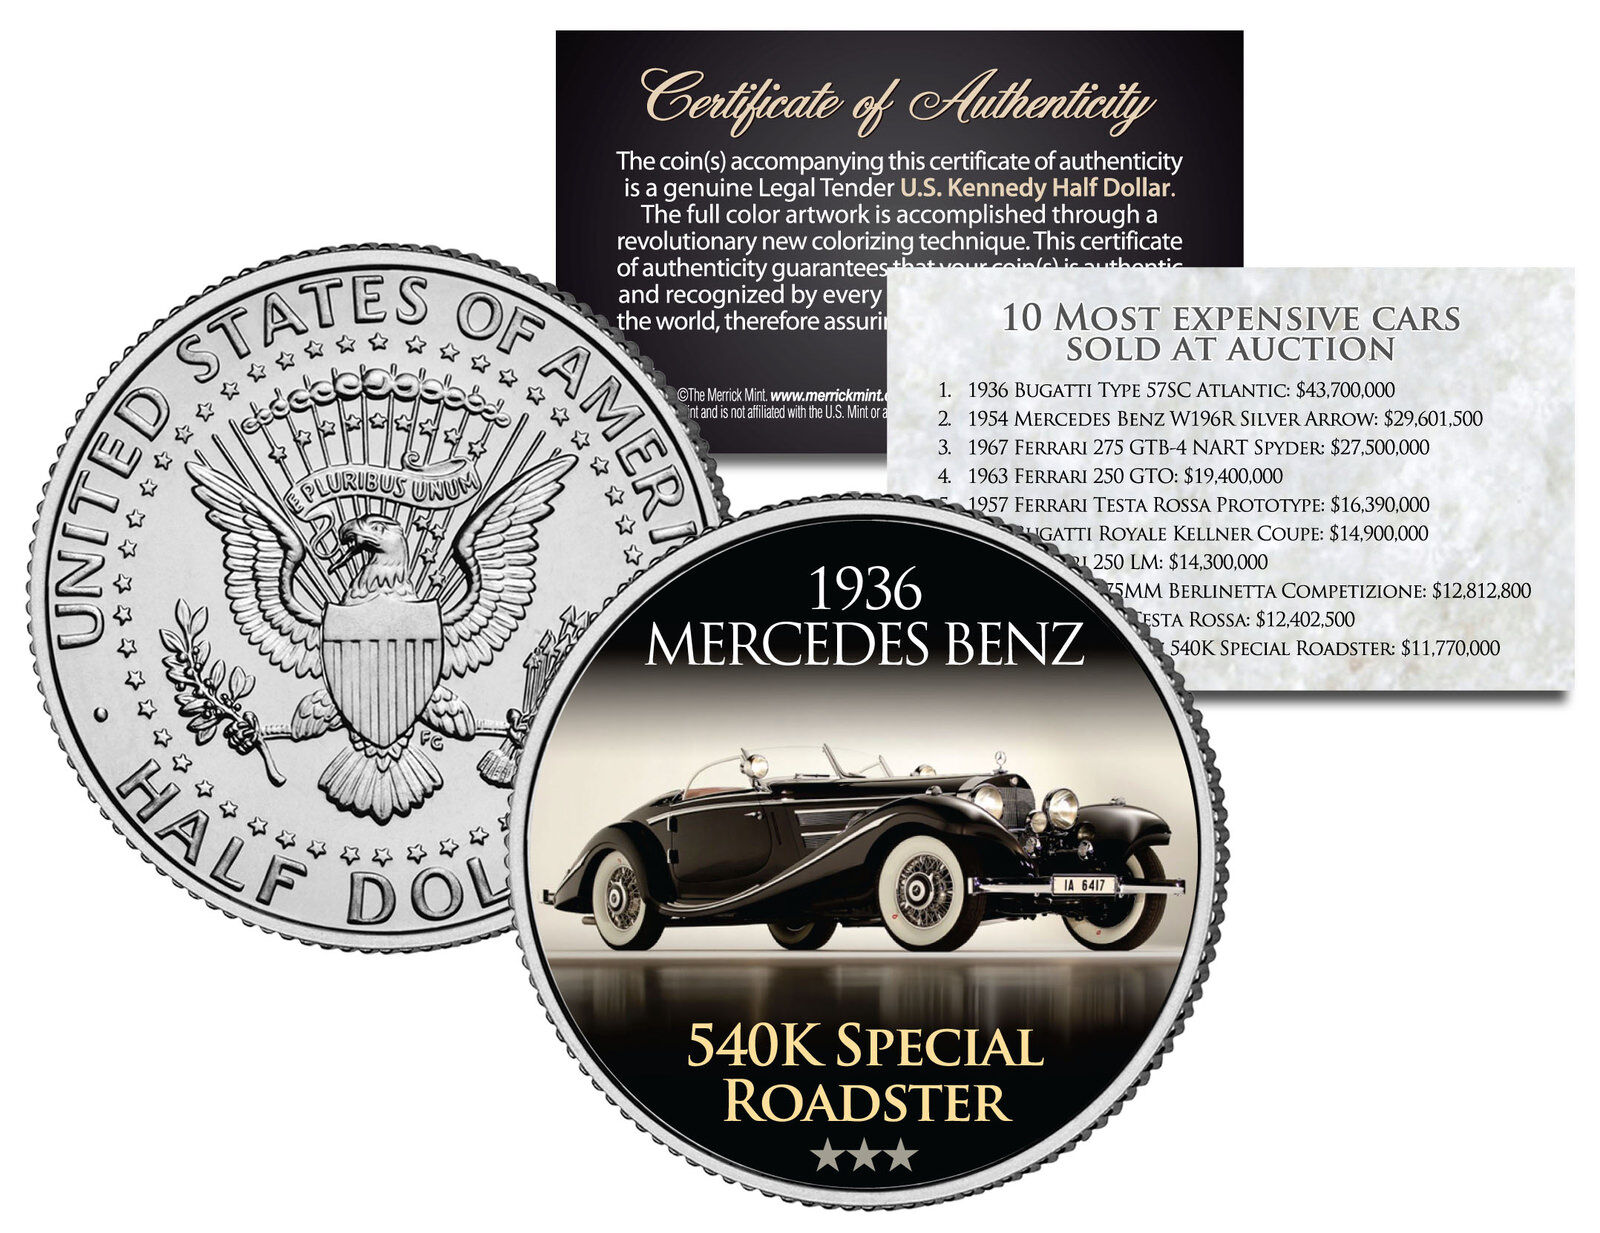 1936 MERCEDES BENZ Expensive Auction Car JFK Half Dollar Coin SPECIAL ROADSTER